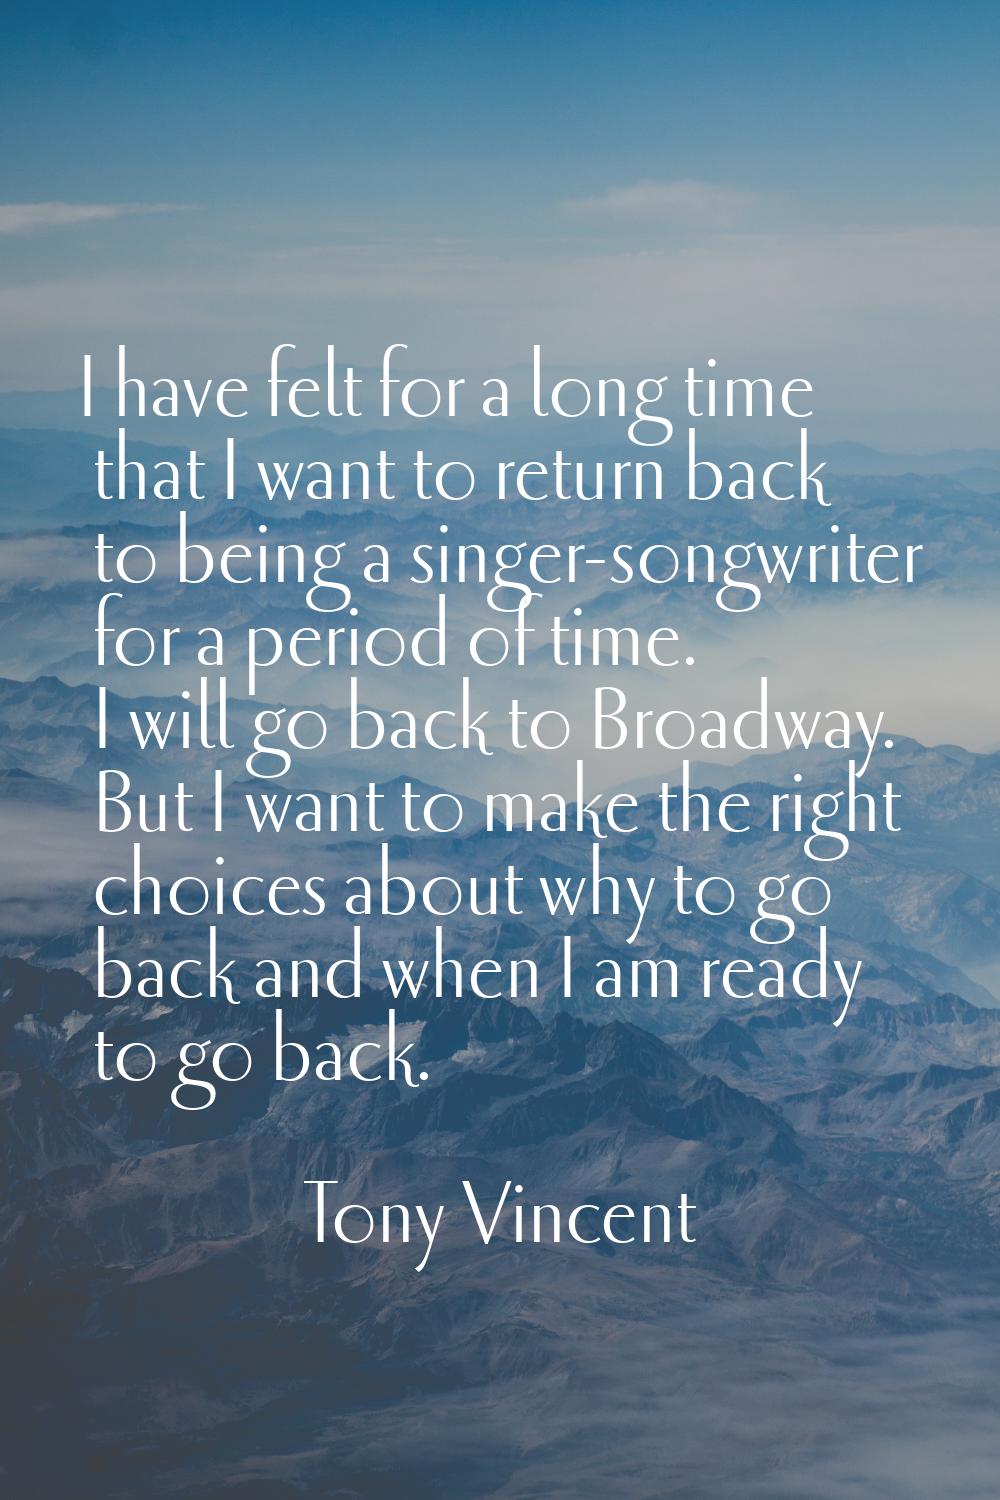 I have felt for a long time that I want to return back to being a singer-songwriter for a period of